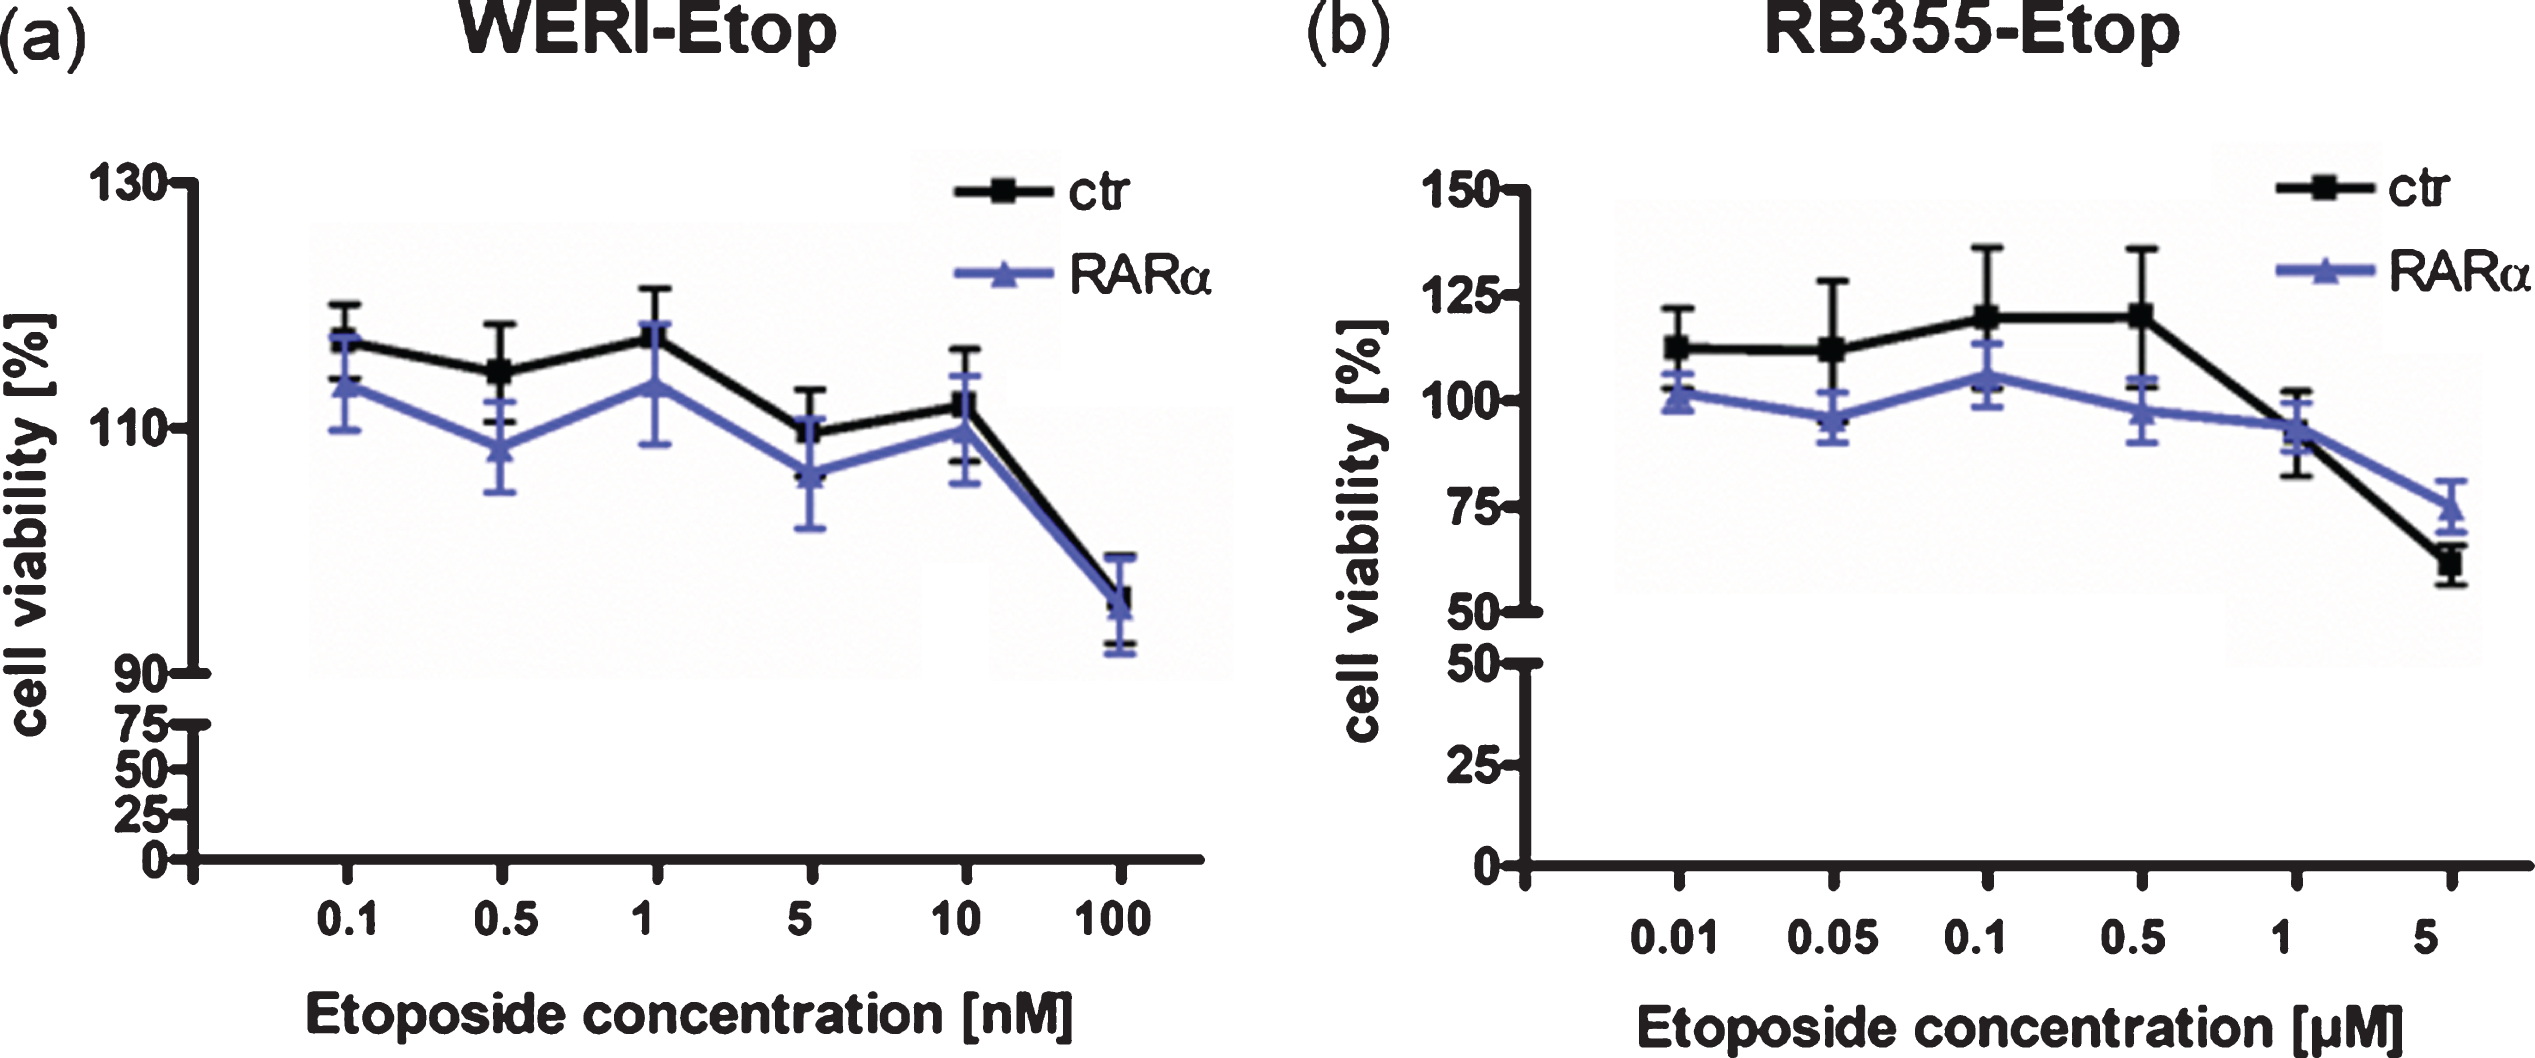 Effect of RARα overexpression on etoposide re-sensitization of etoposide resistant RB cell lines. (a) Compared to control cells (ctr), RARα overexpression in etoposide resistant WERI-Rb1 cells (WERI-Etop) cells did not induce significant changes in cell viability after etoposide treatment. (b) Compared to control cells (ctr) RARα overexpression did not significantly change cell viability of drug treated etoposide resistant RB355 cells (RB355-Etop) cells. Etoposide resistant RB cell lines were treated with different etoposide concentrations (0.01 –5μM) for 72 h and WST-1 assays were performed. Values are means from 3 independent experiments ±SEM and were normalized against untreated controls. No statistical differences compared to the control group could be calculated by Student‘s t-test.